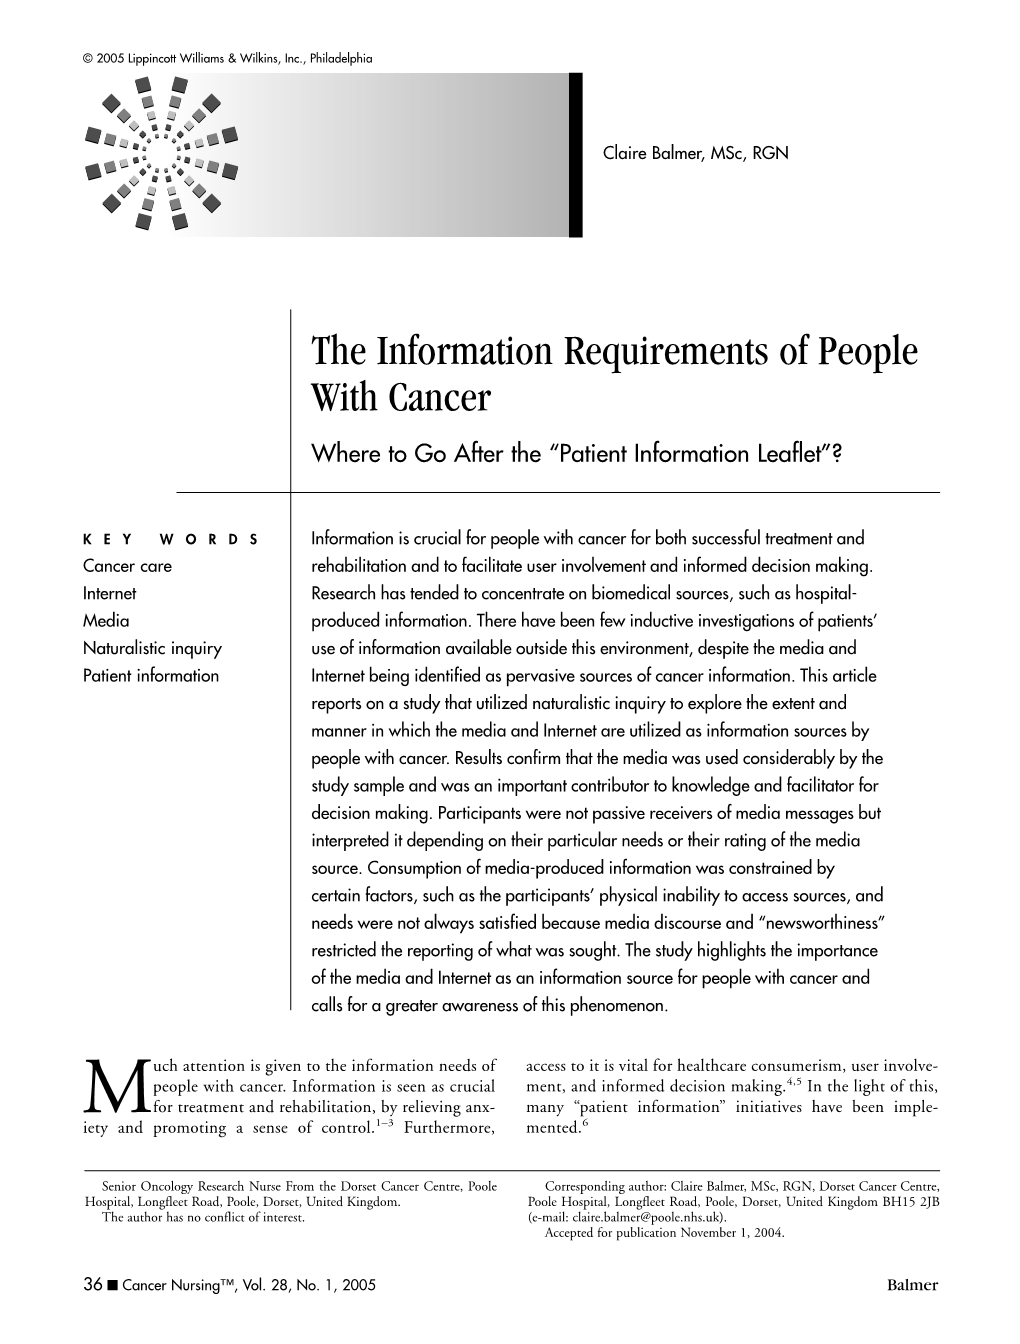 The Information Requirements of People with Cancer Where to Go After the “Patient Information Leaflet”?